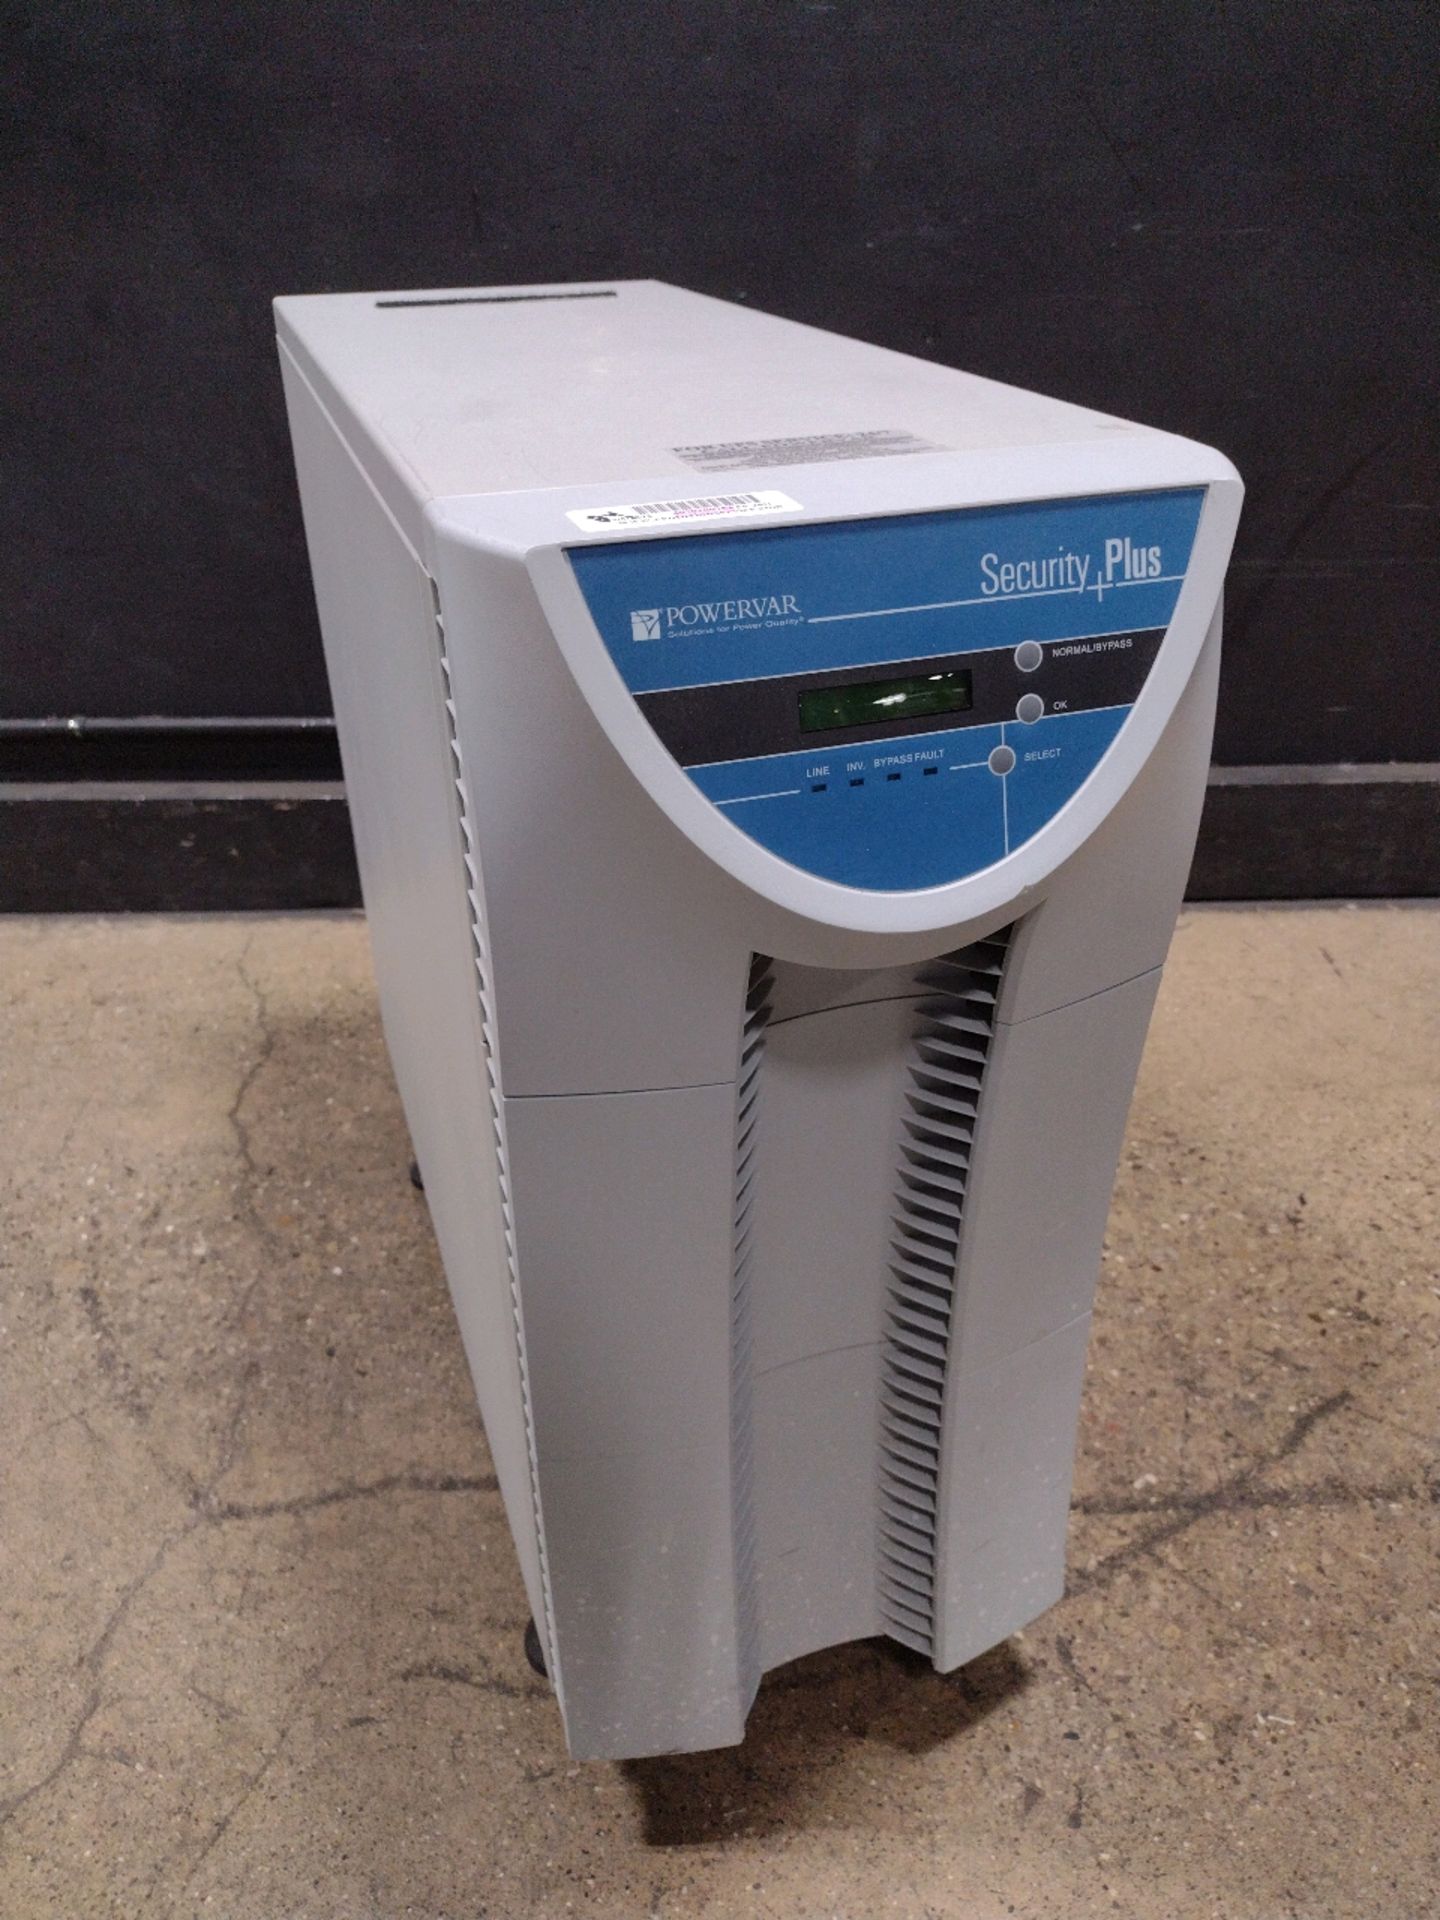 POWERVAR SECURITY PLUS UPS (LOCATED AT 3325 MOUNT PROSPECT ROAD, FRANKLIN PARK, IL, 60131)